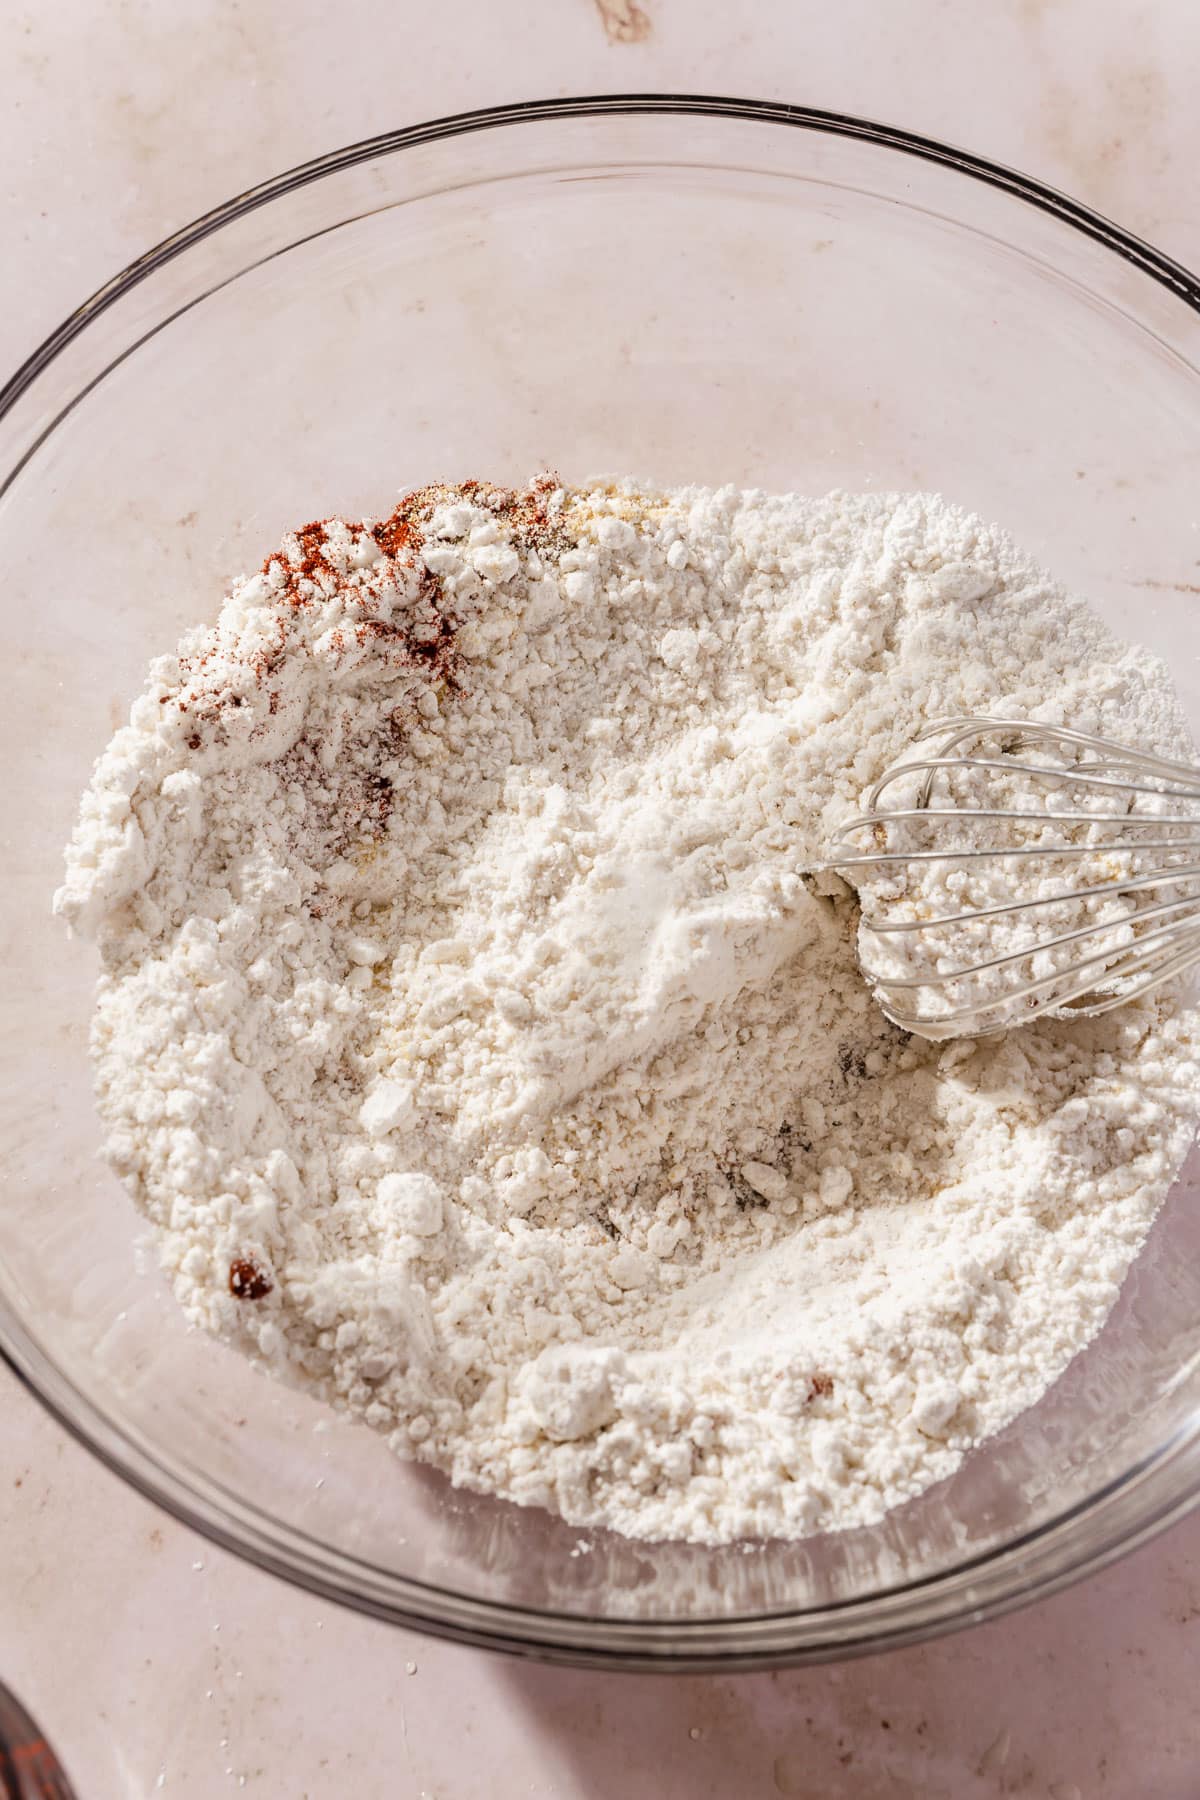 A glass mixing bowl of gluten-free flour, paprika, salt, garlic powder, and baking powder being mixed together with a whisk.